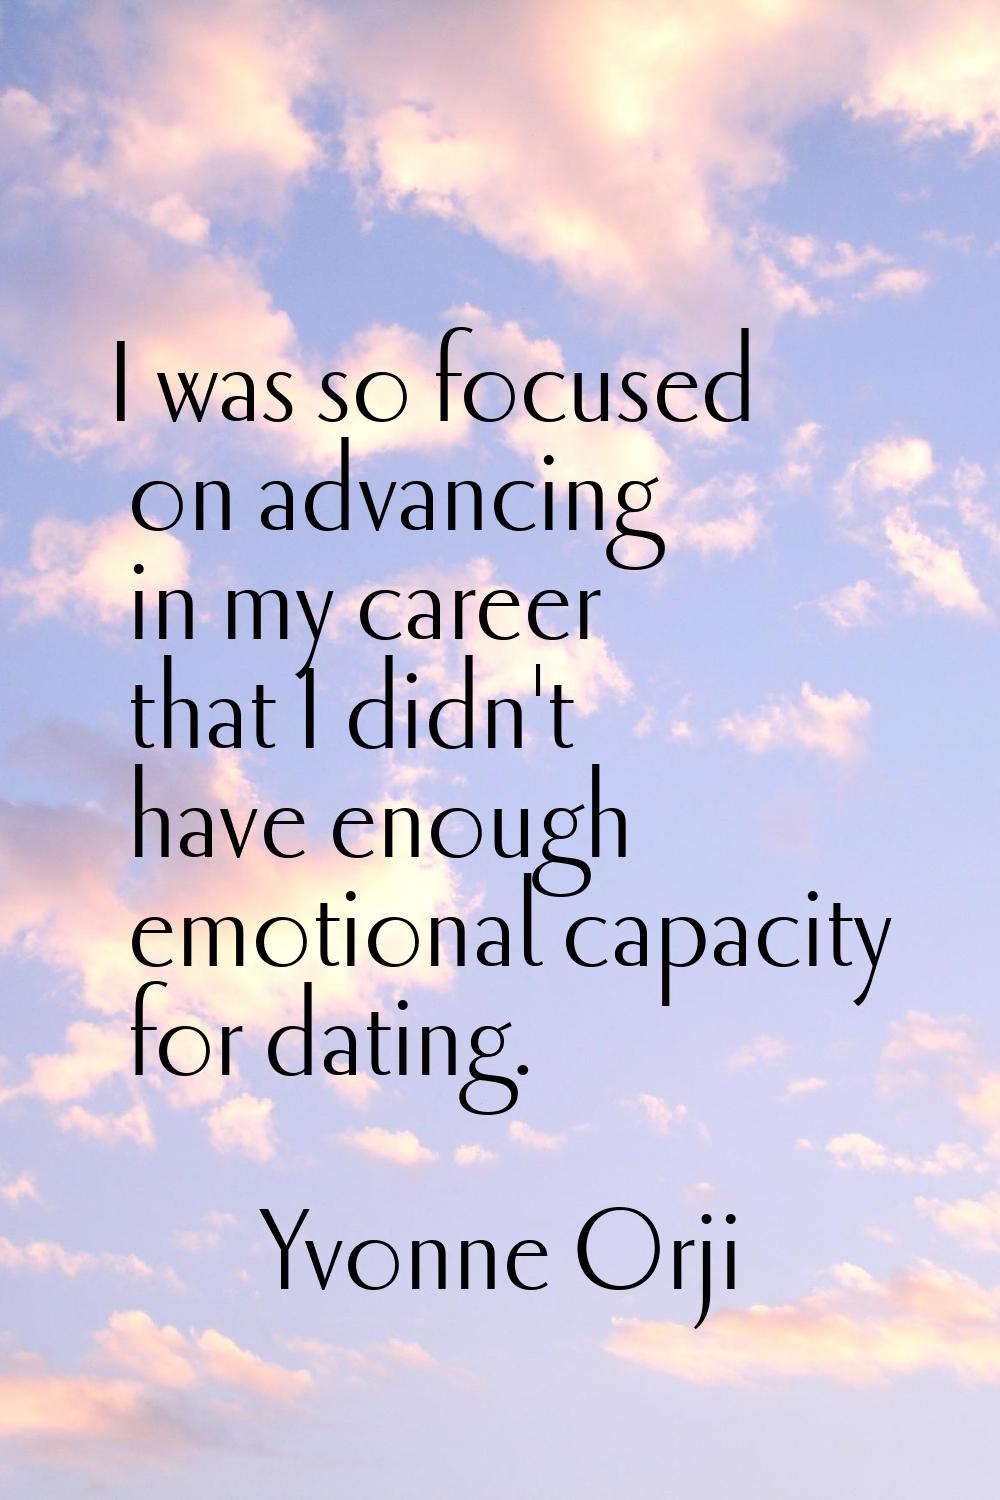 I was so focused on advancing in my career that I didn't have enough emotional capacity for dating.